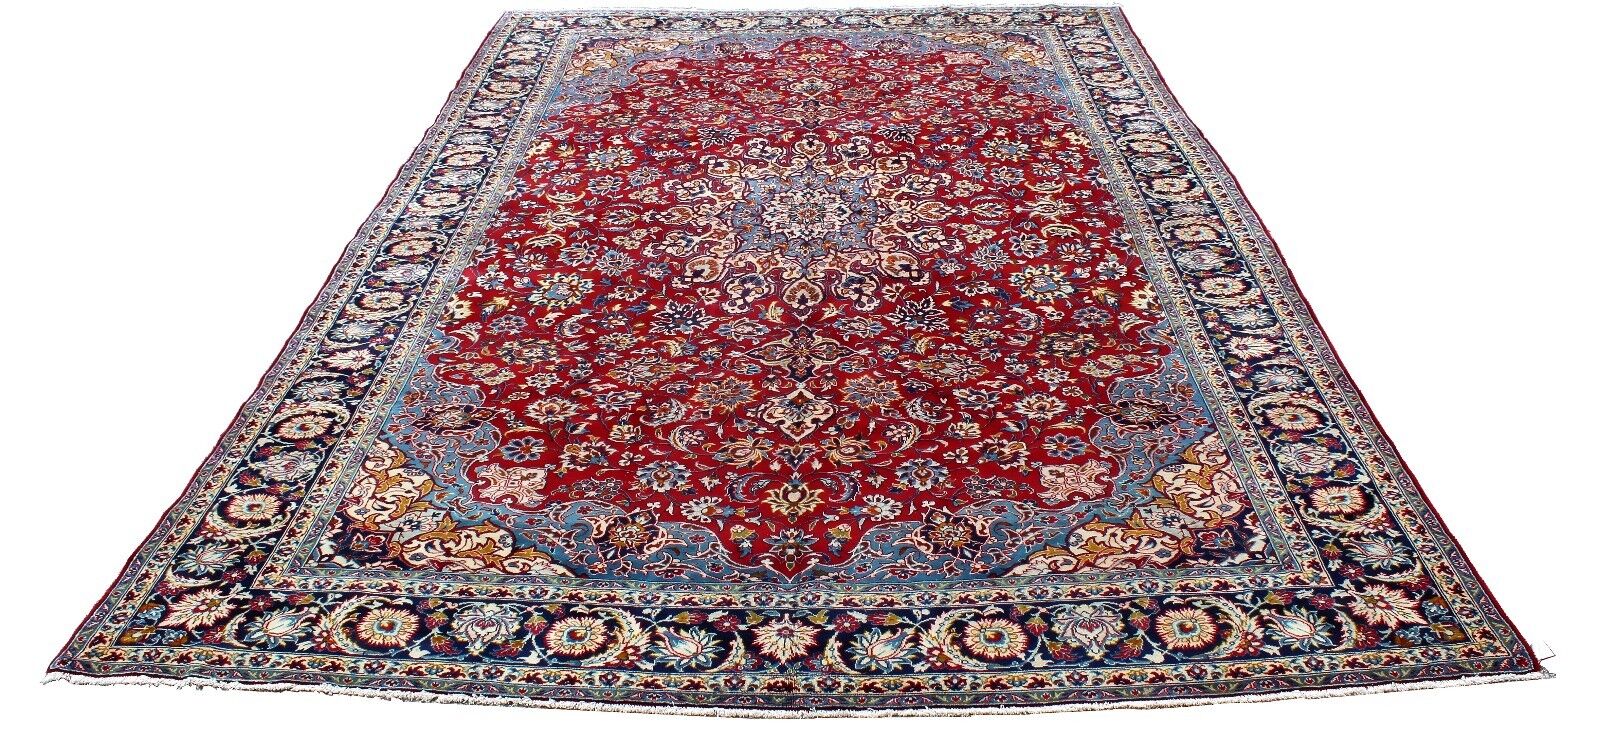 Vintage Hand-Knotted Palatial Area Rug, Cotton Warp & Wool 